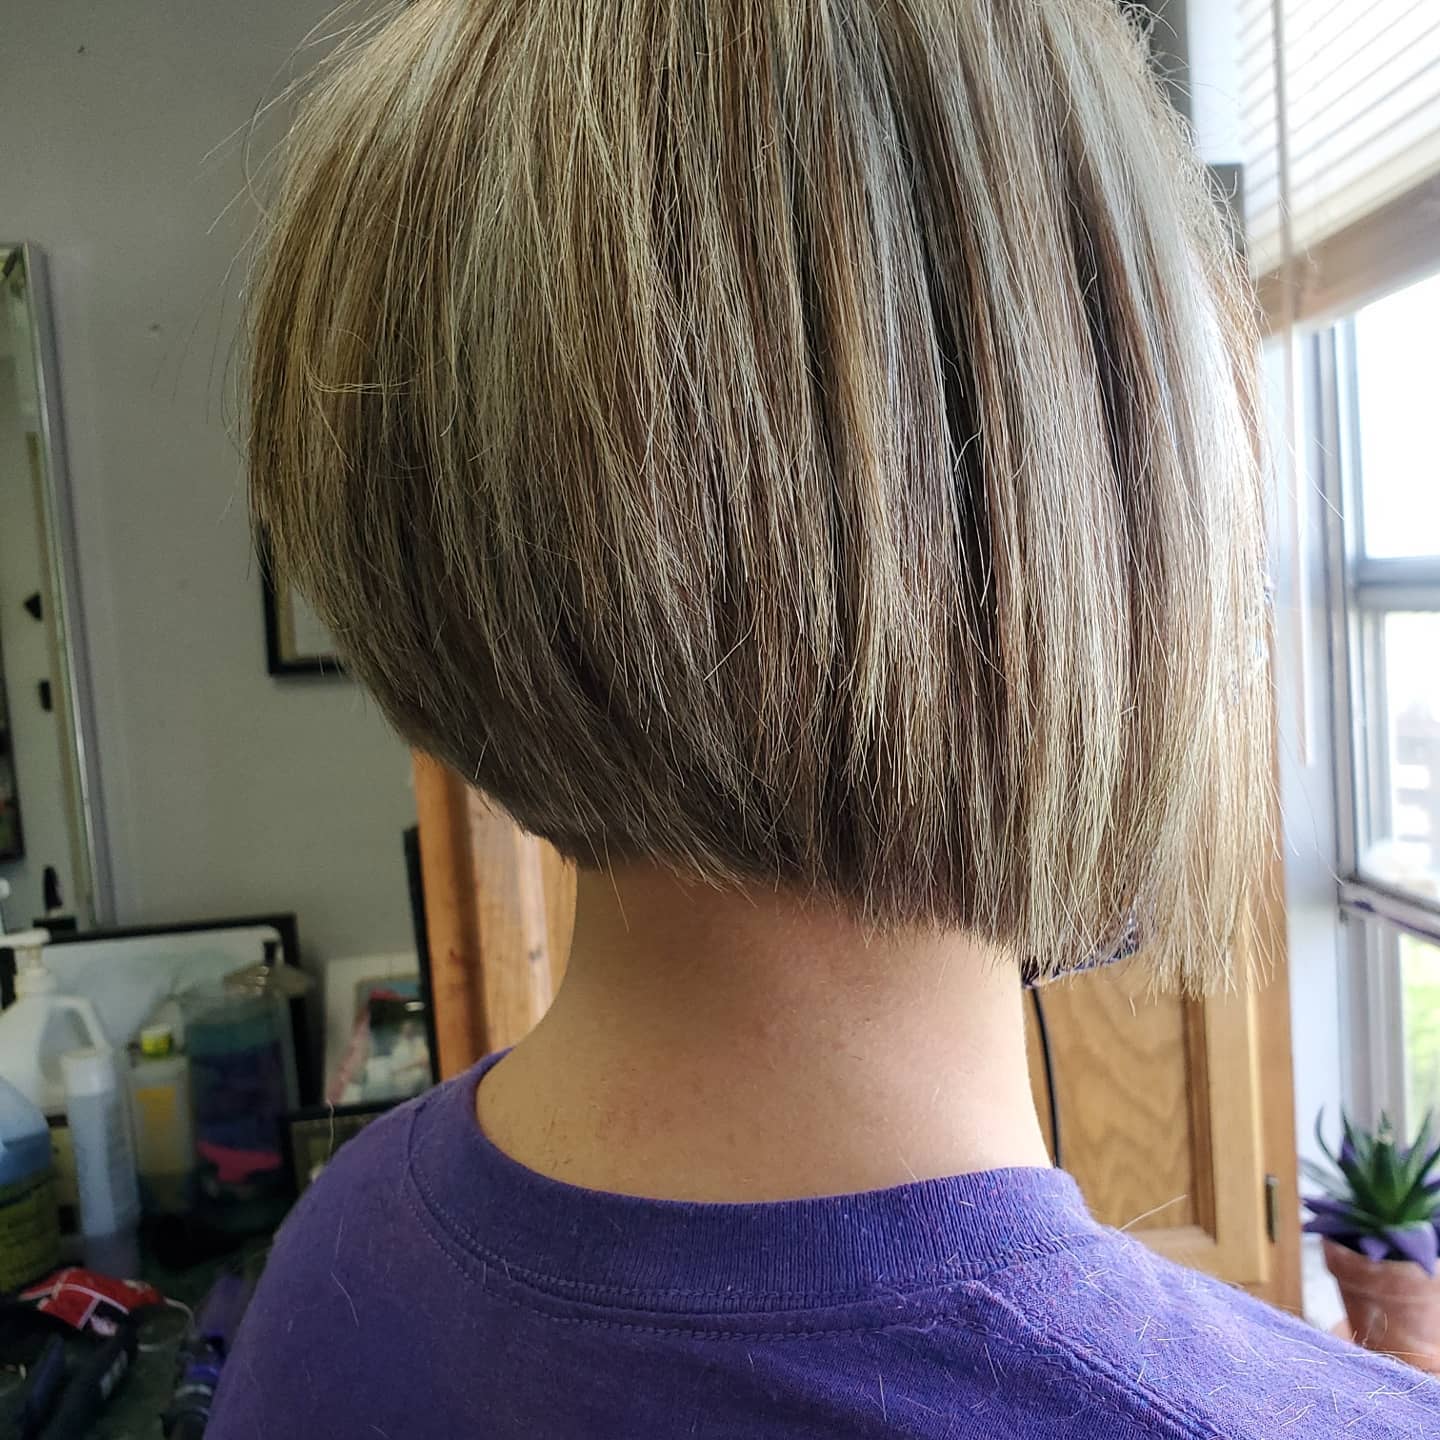 Stacked Bob 31 Long stacked bob | Medium length stacked bob | Pictures of stacked bob haircuts front and back Stacked Bob Hairstyles for Women